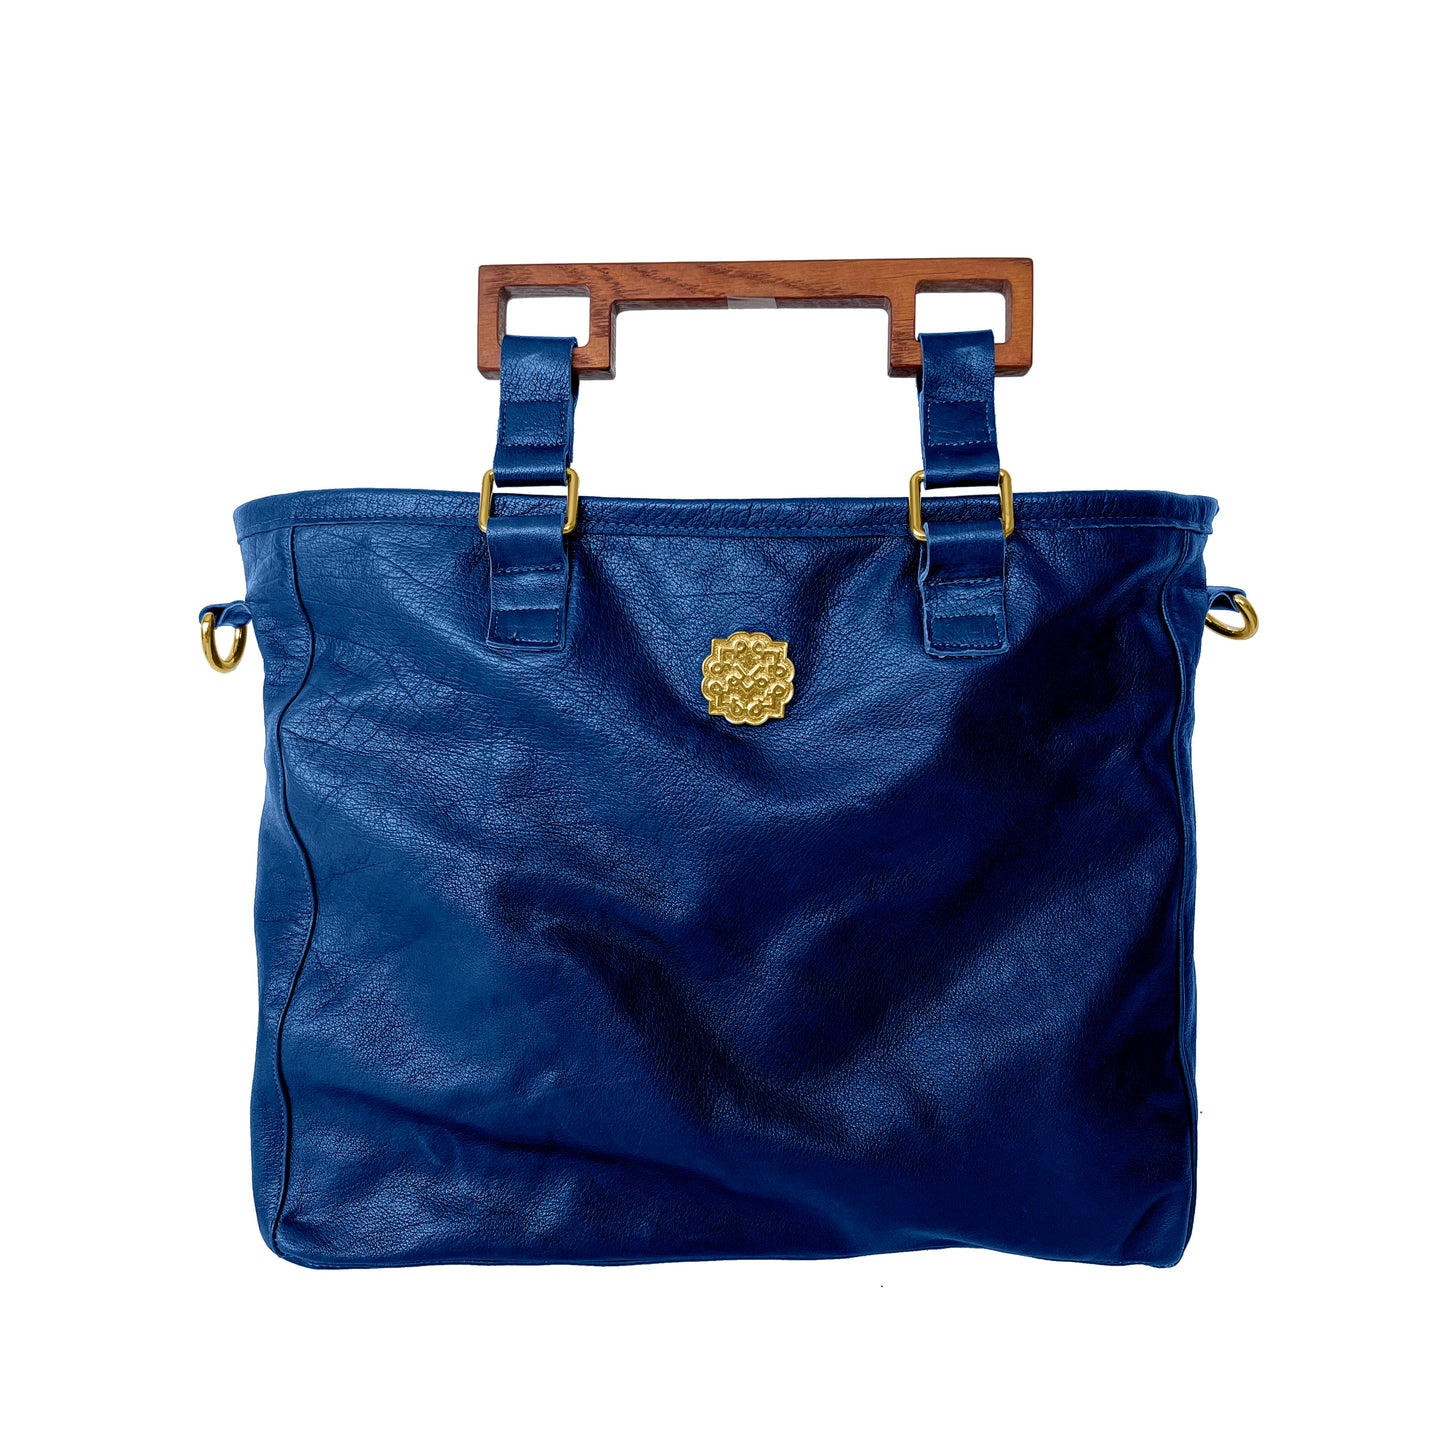 Lotta Pieces | Most Versatile Leather And Suede Tote Bag With Wooden Handles